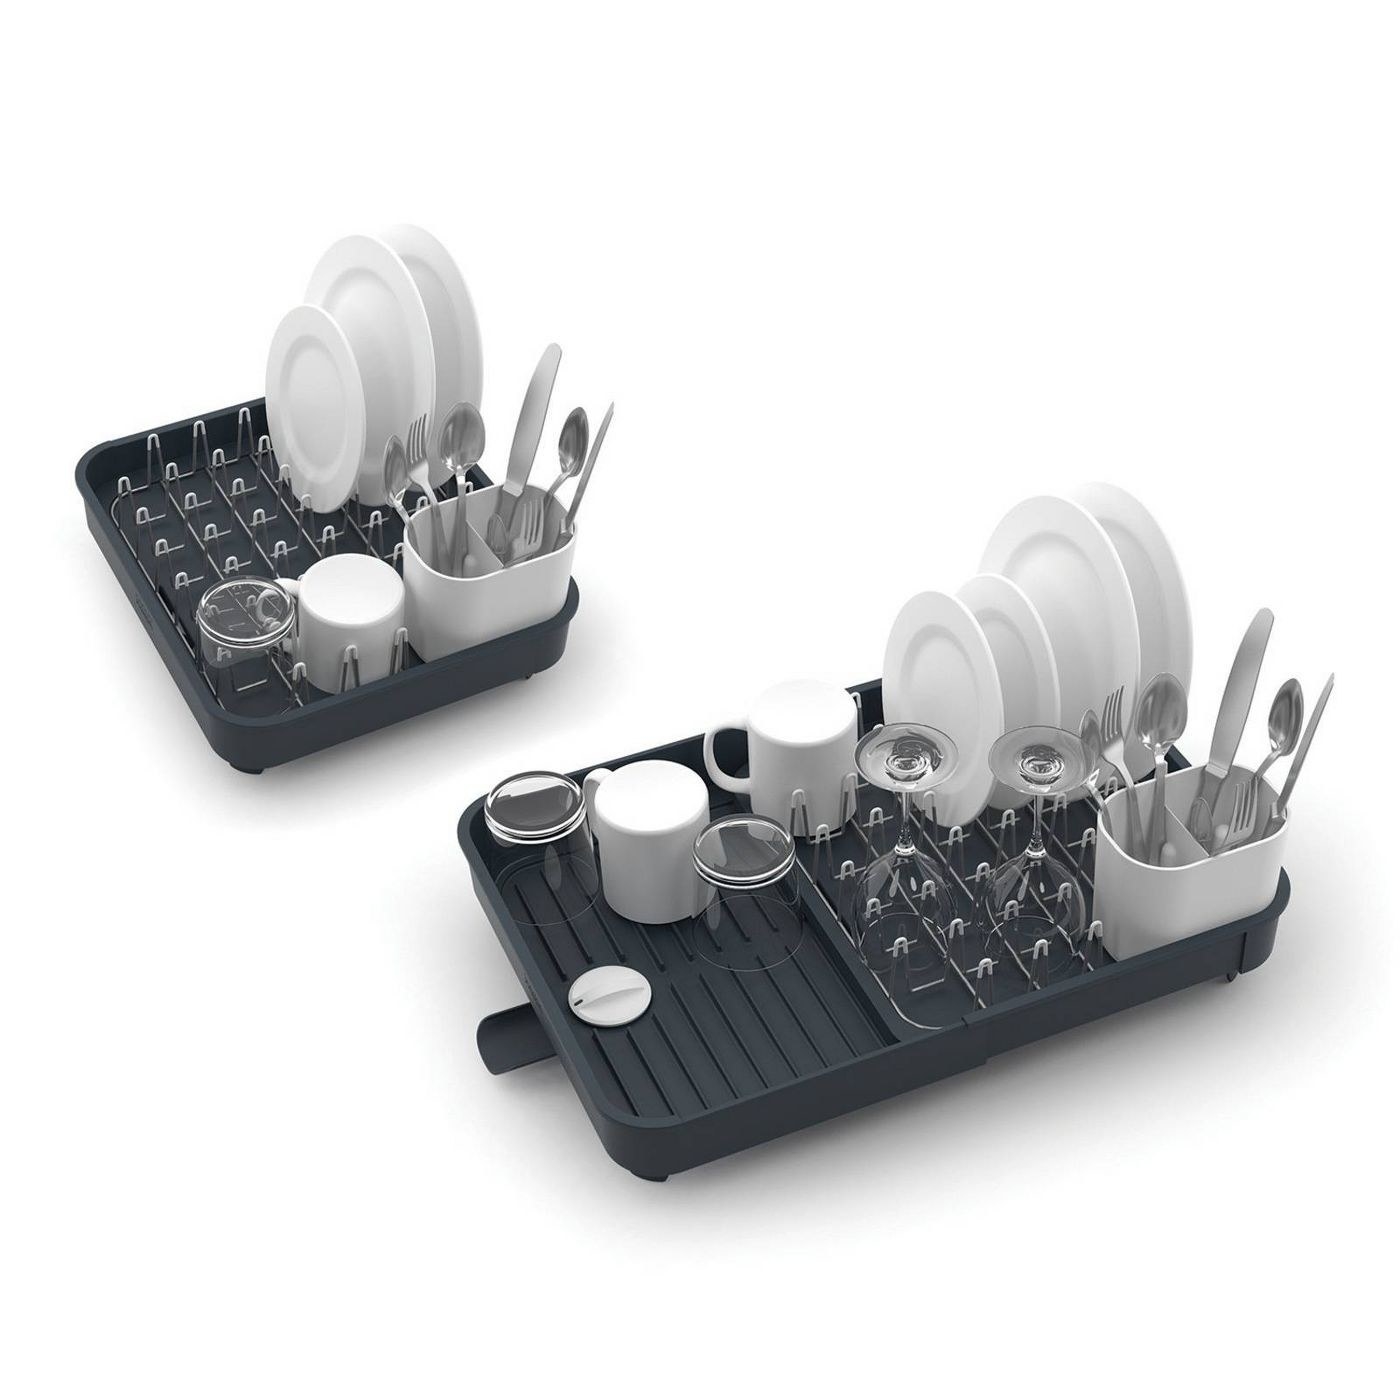 The dish rack shown in regular size and expanded